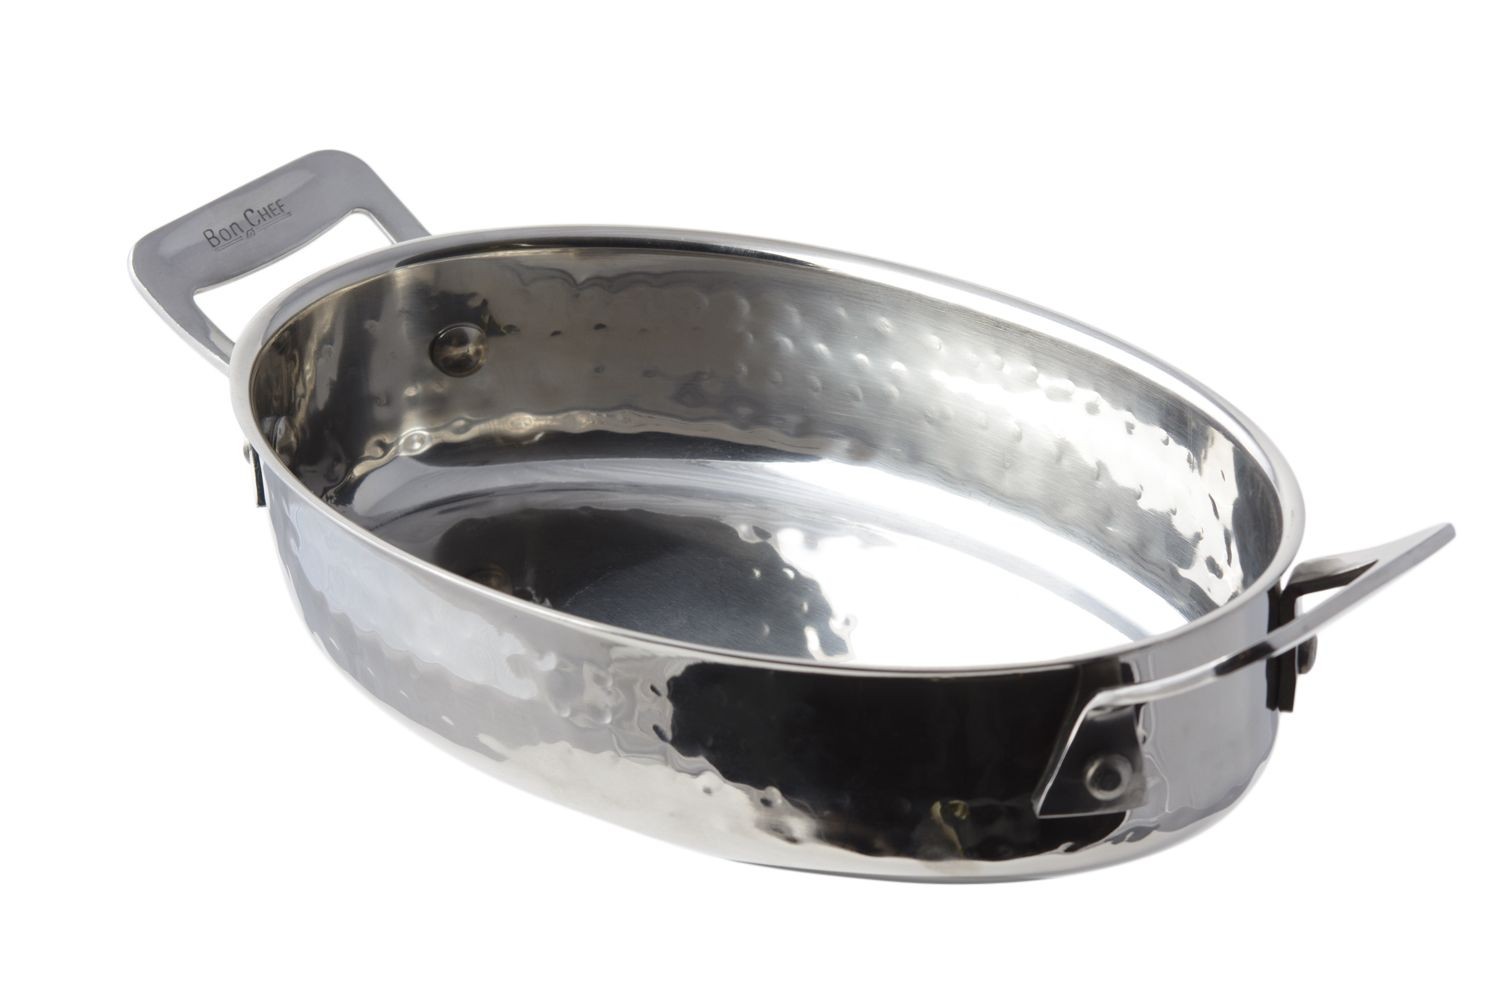 Bon Chef 60029HF Cucina Stainless Steel Oval Dish, Hammered Finish, 36 oz.